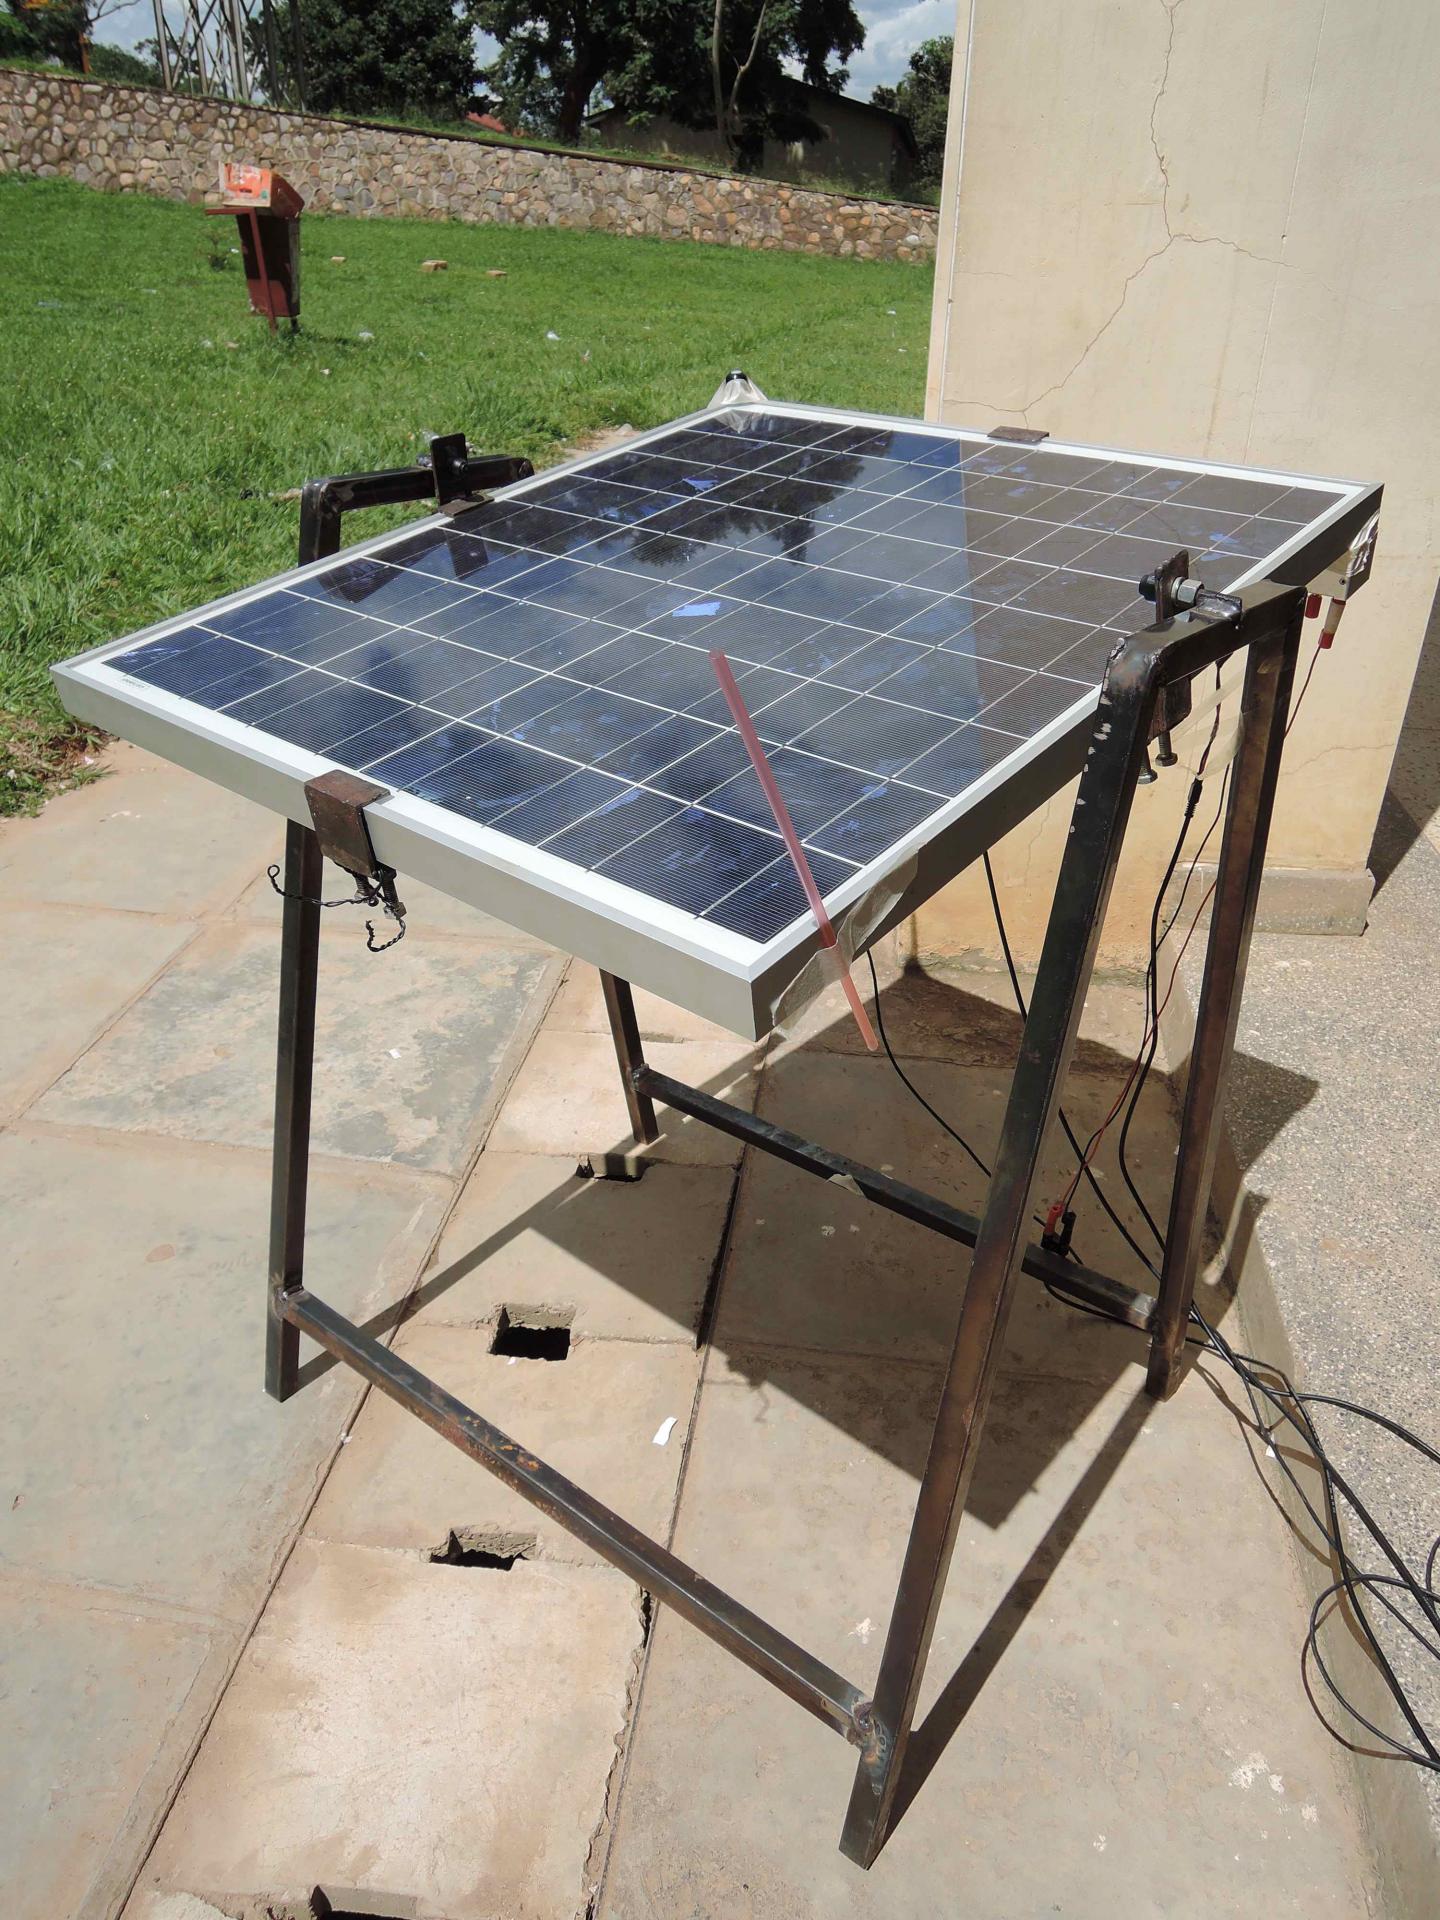 Solar Cells and Buckets to Increase Efficiency